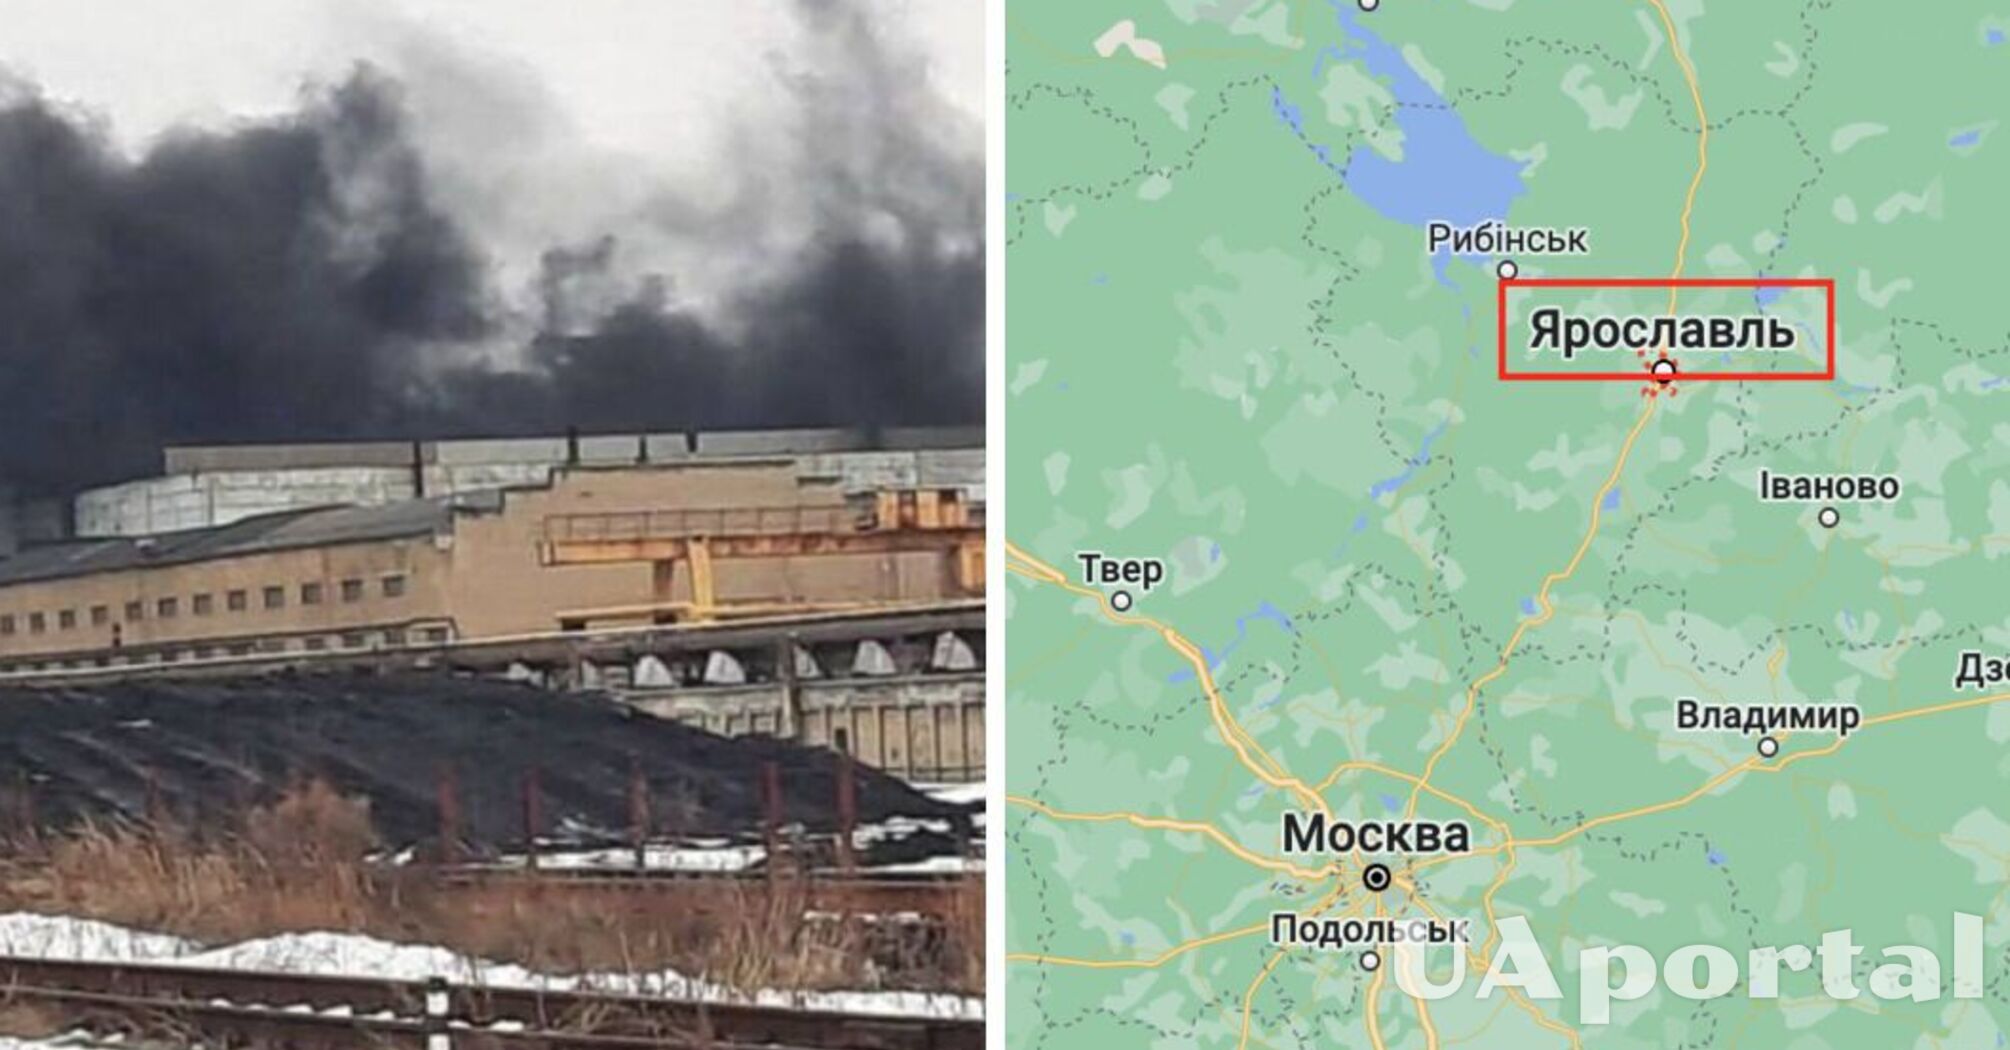 Yaroslavl Motor Plant, which produces engines for nuclear complexes, is on fire in Russia - fire in Yaroslavl on March 23